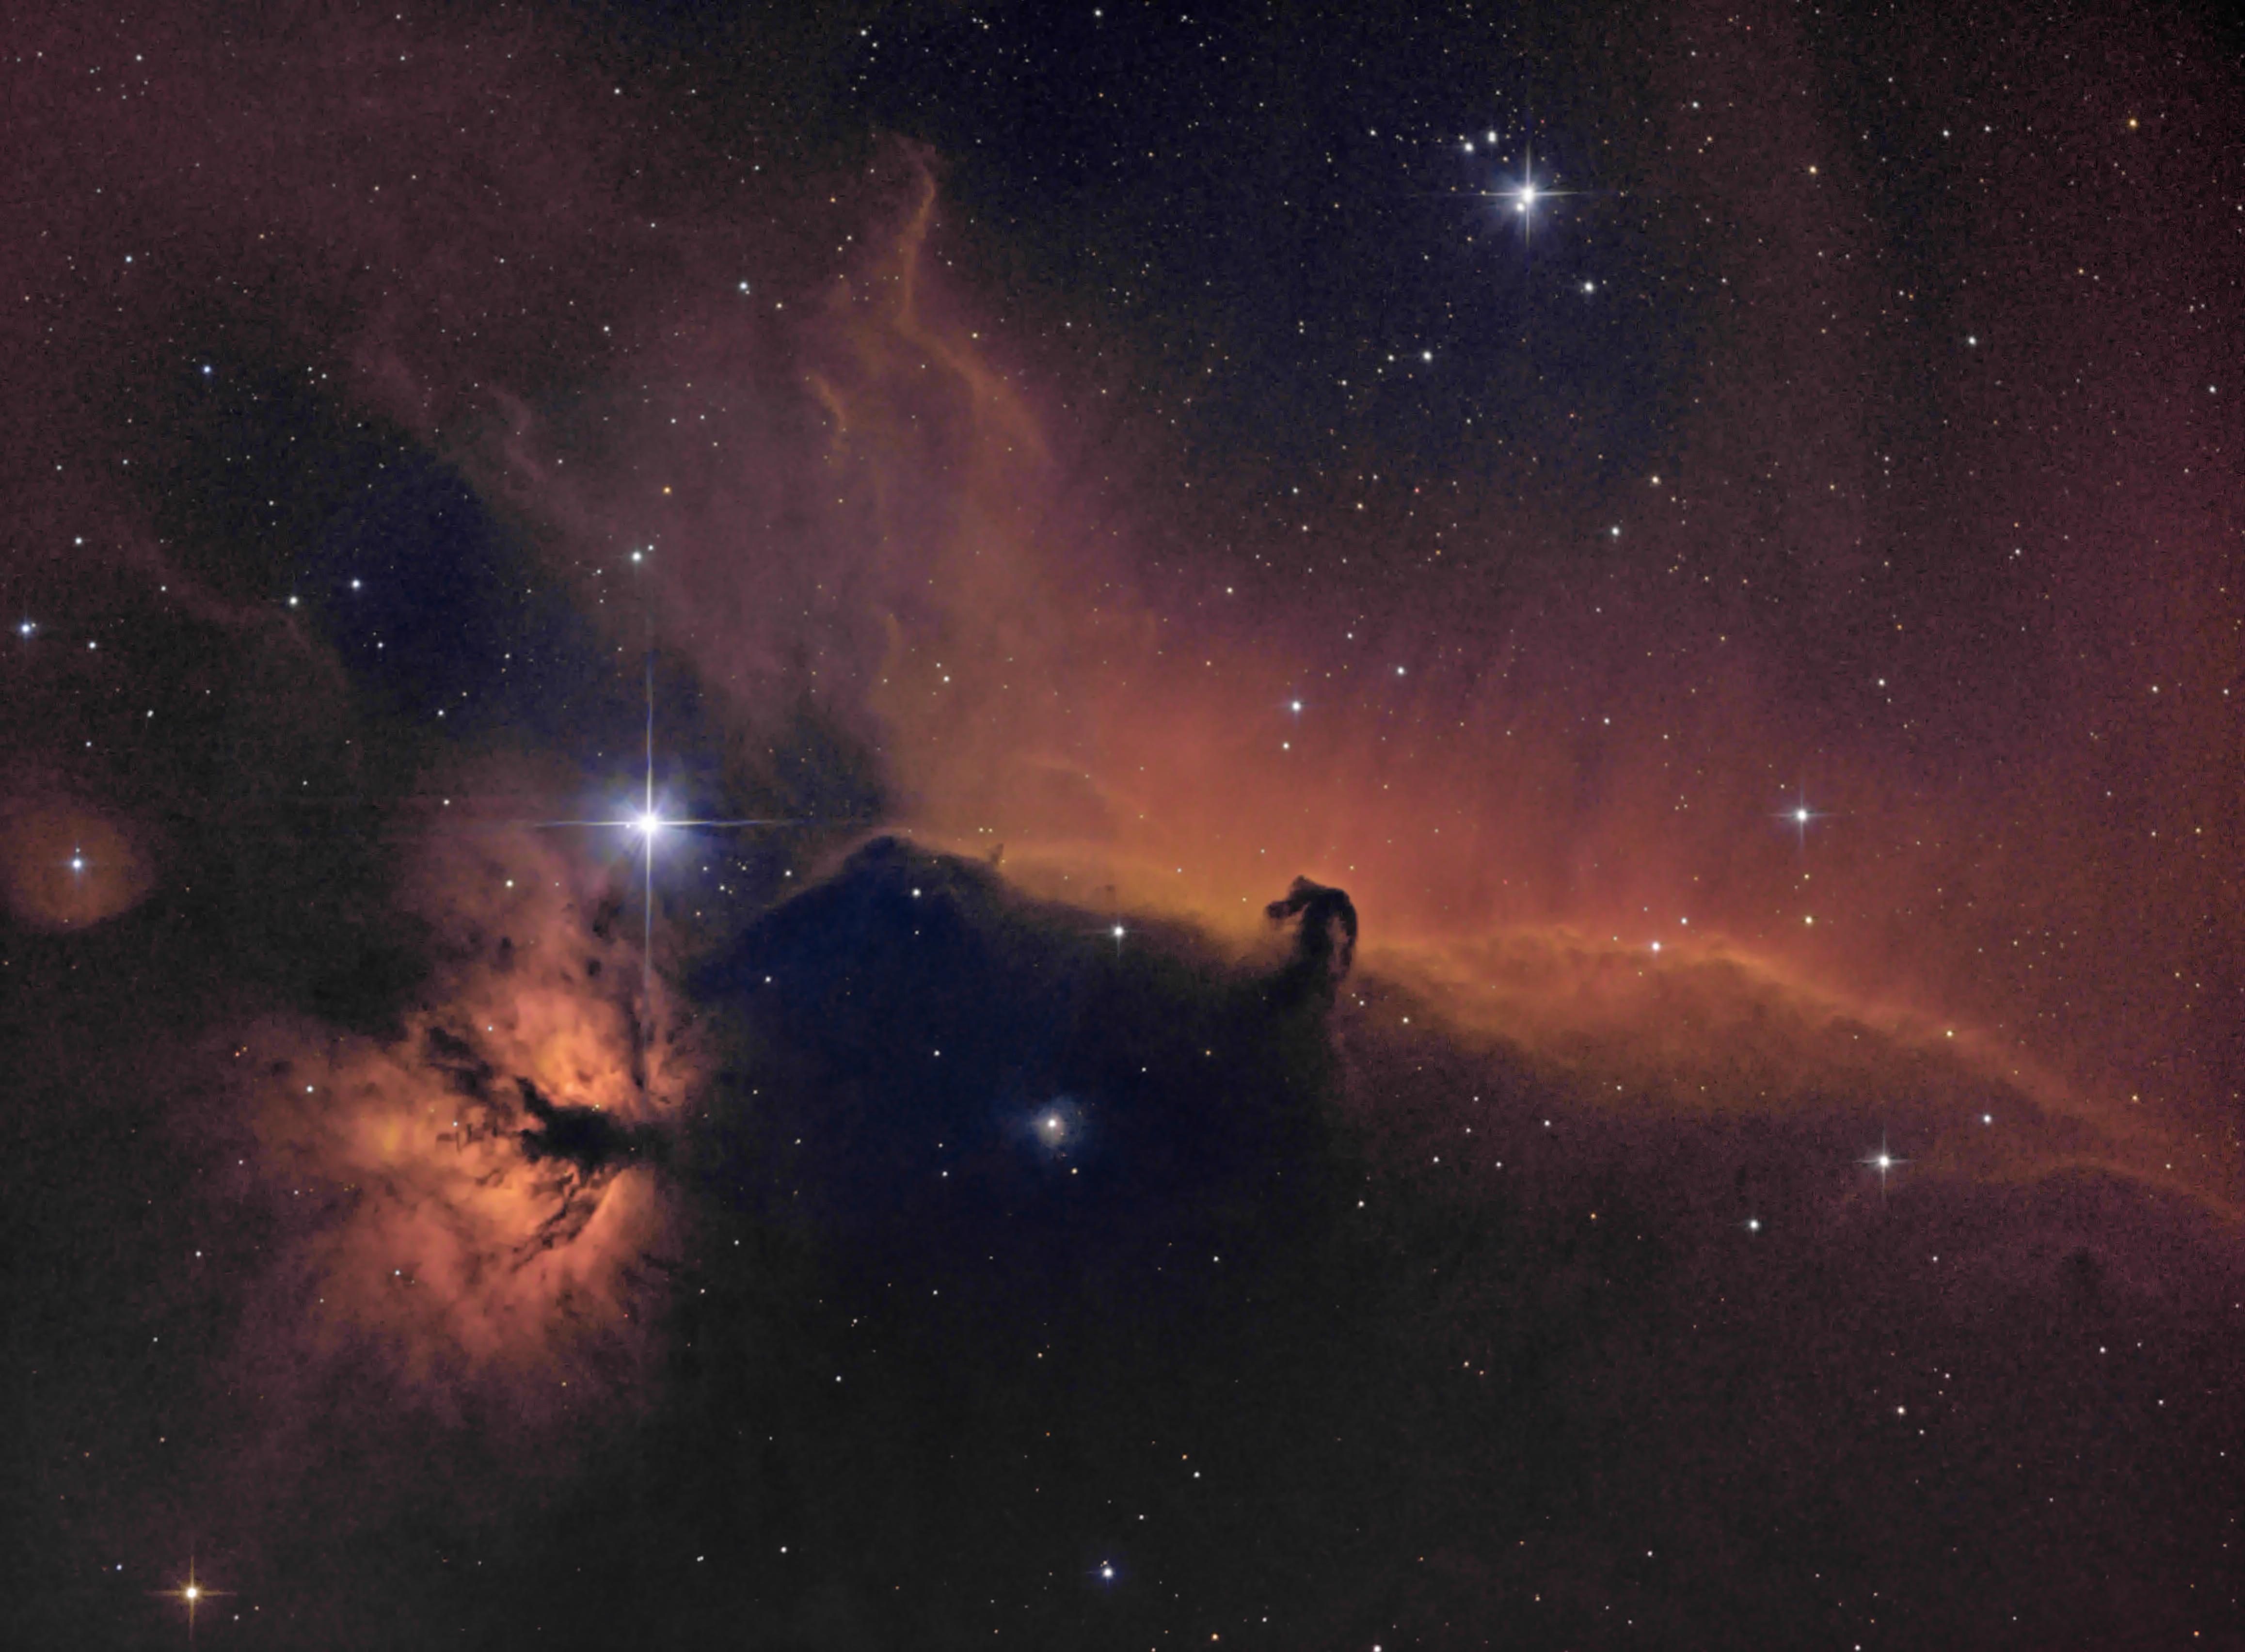 The Horsehead and Flame Nebulas, imaged in narrowband